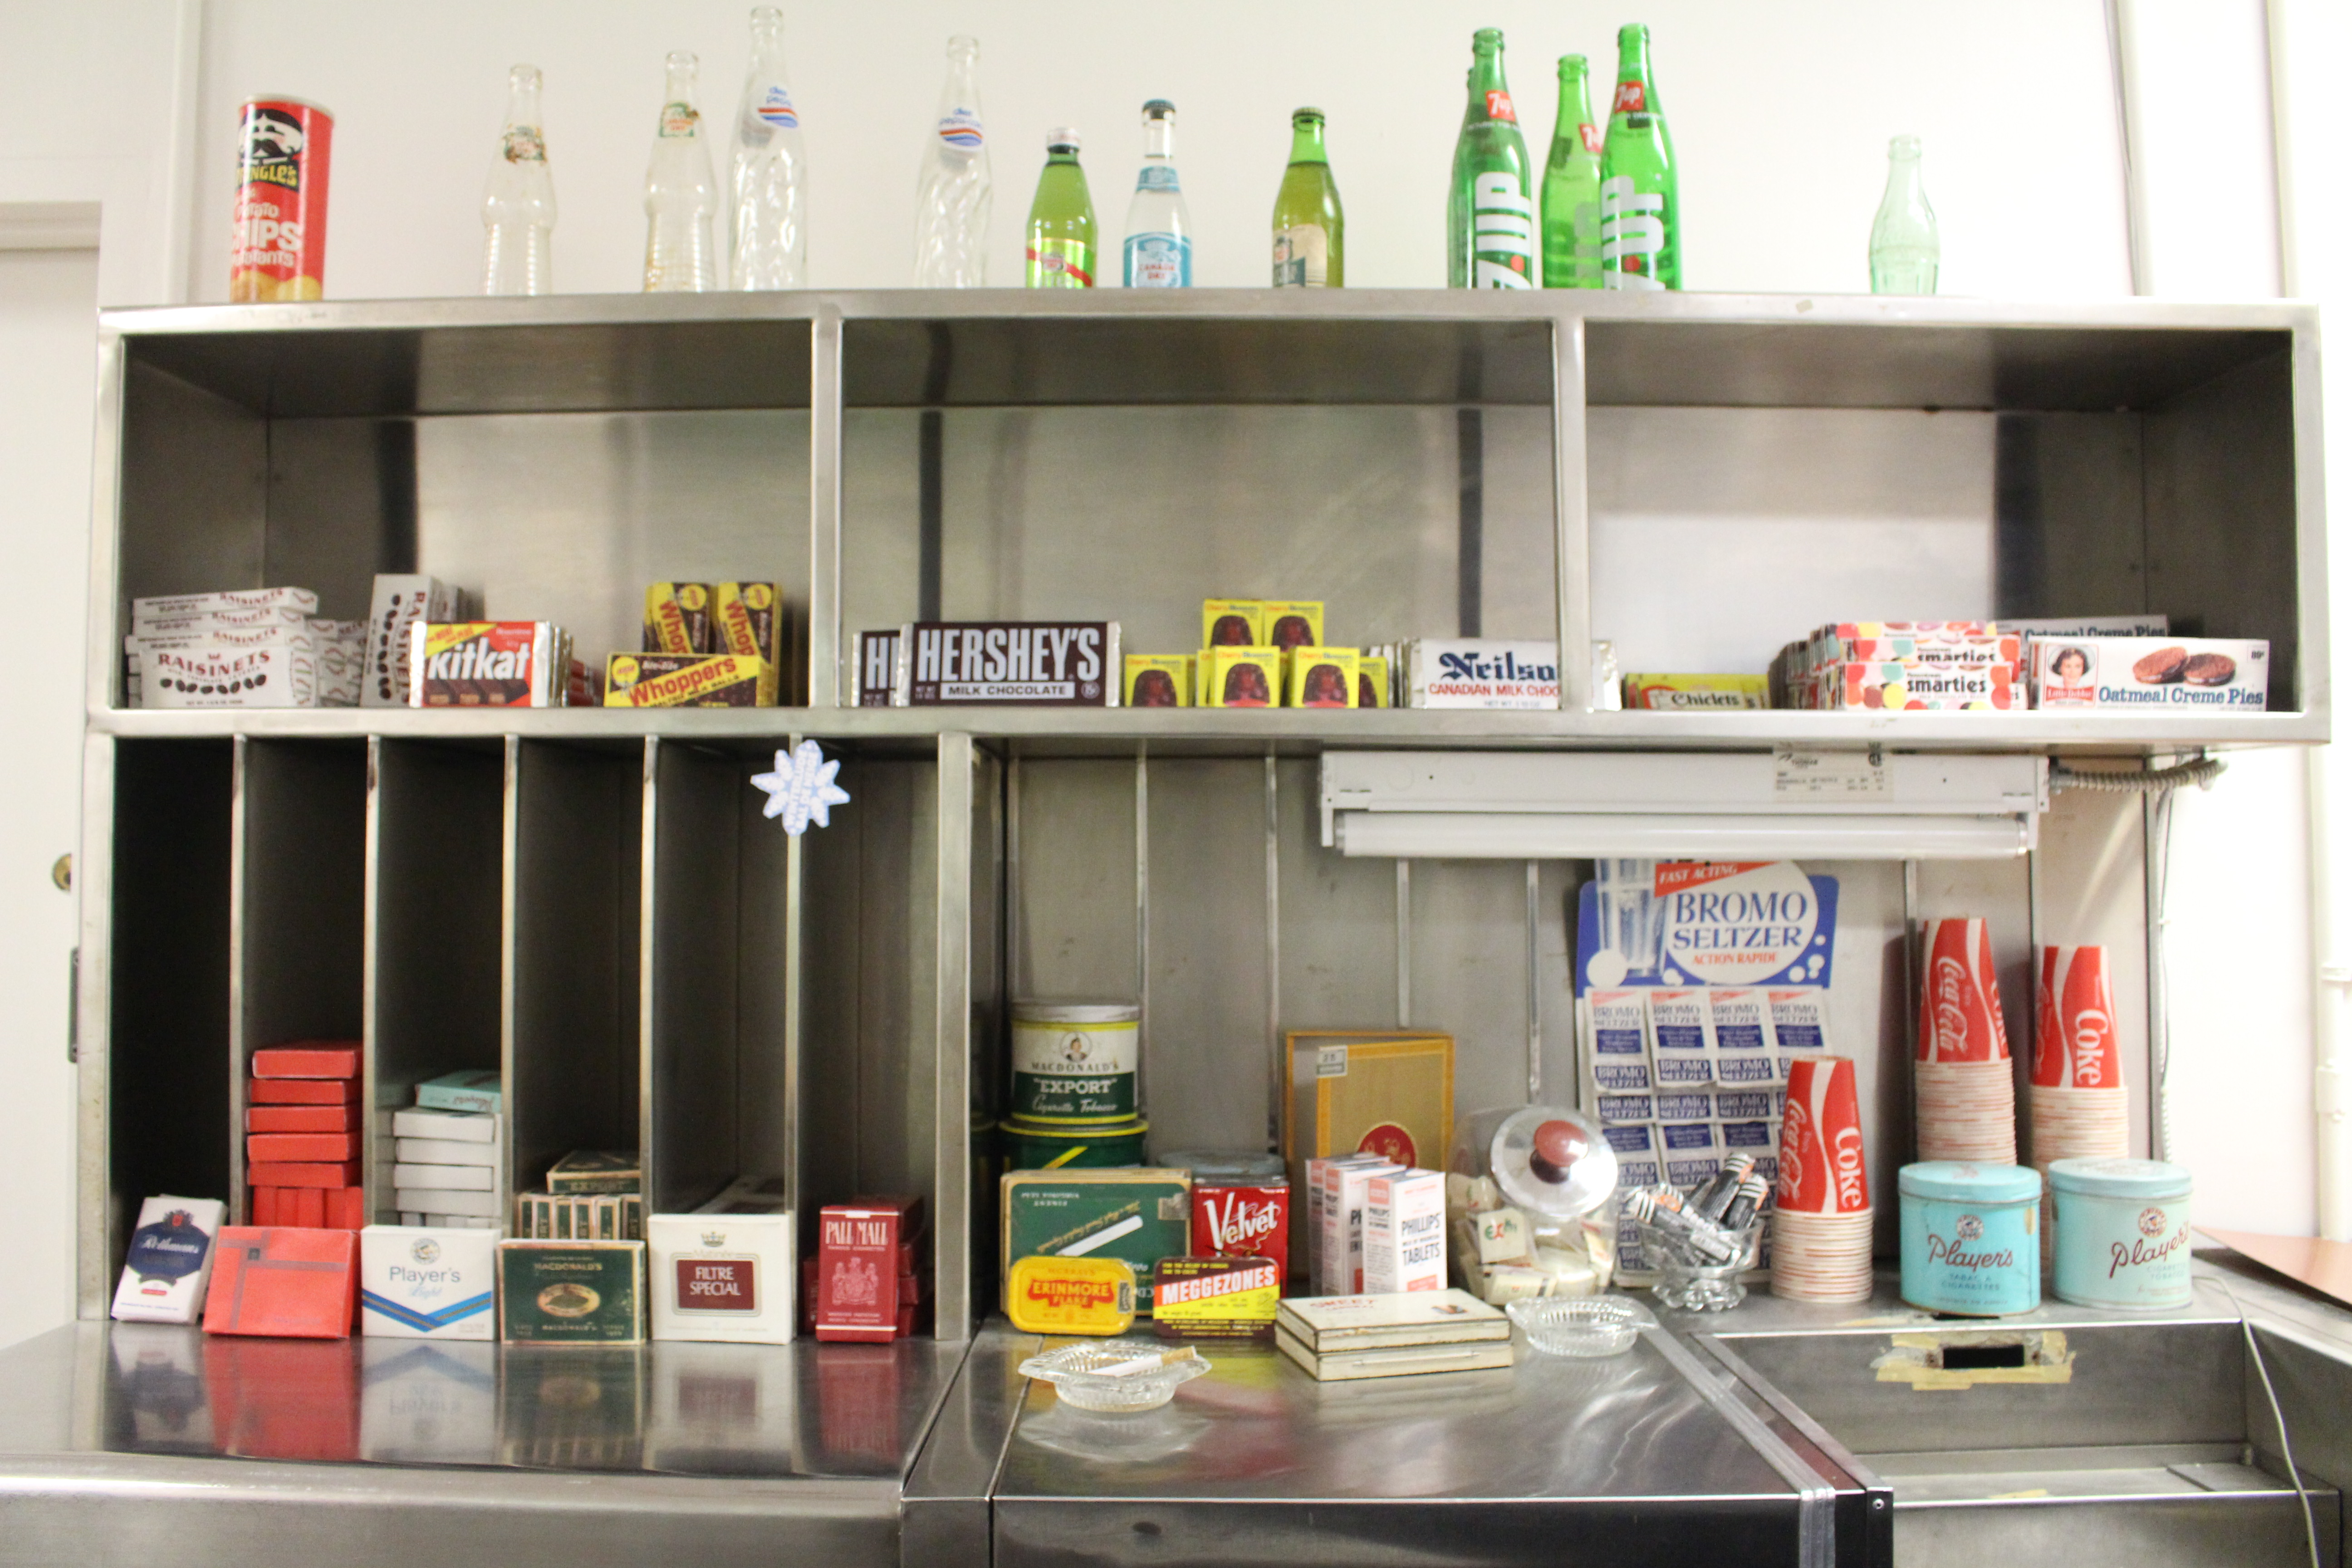 The Diefenbunker's CANEX with items including Gingerale, Hershey's chocolate, chips, etc. on the shelves.